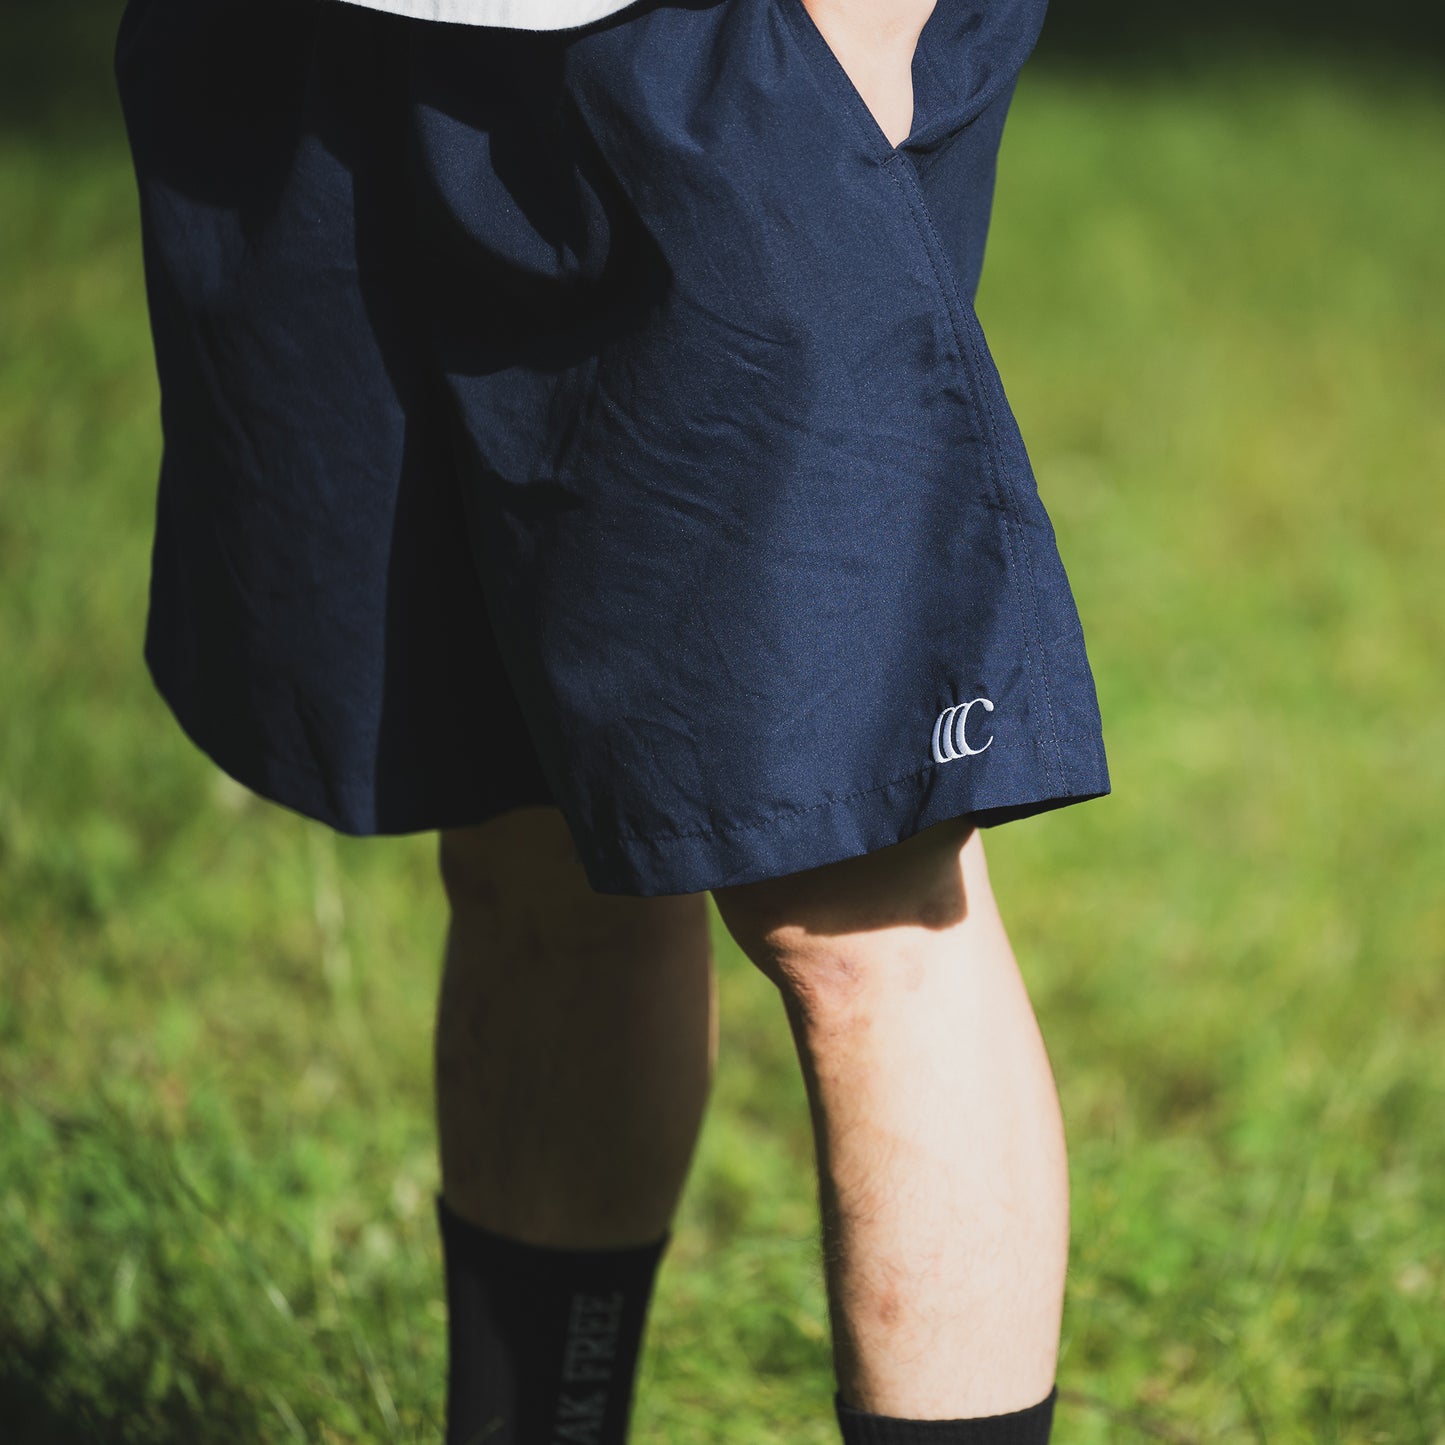 CLUMSY PICTURES CCC EMB MICROFIBER NYLON SHORTS - NAVY